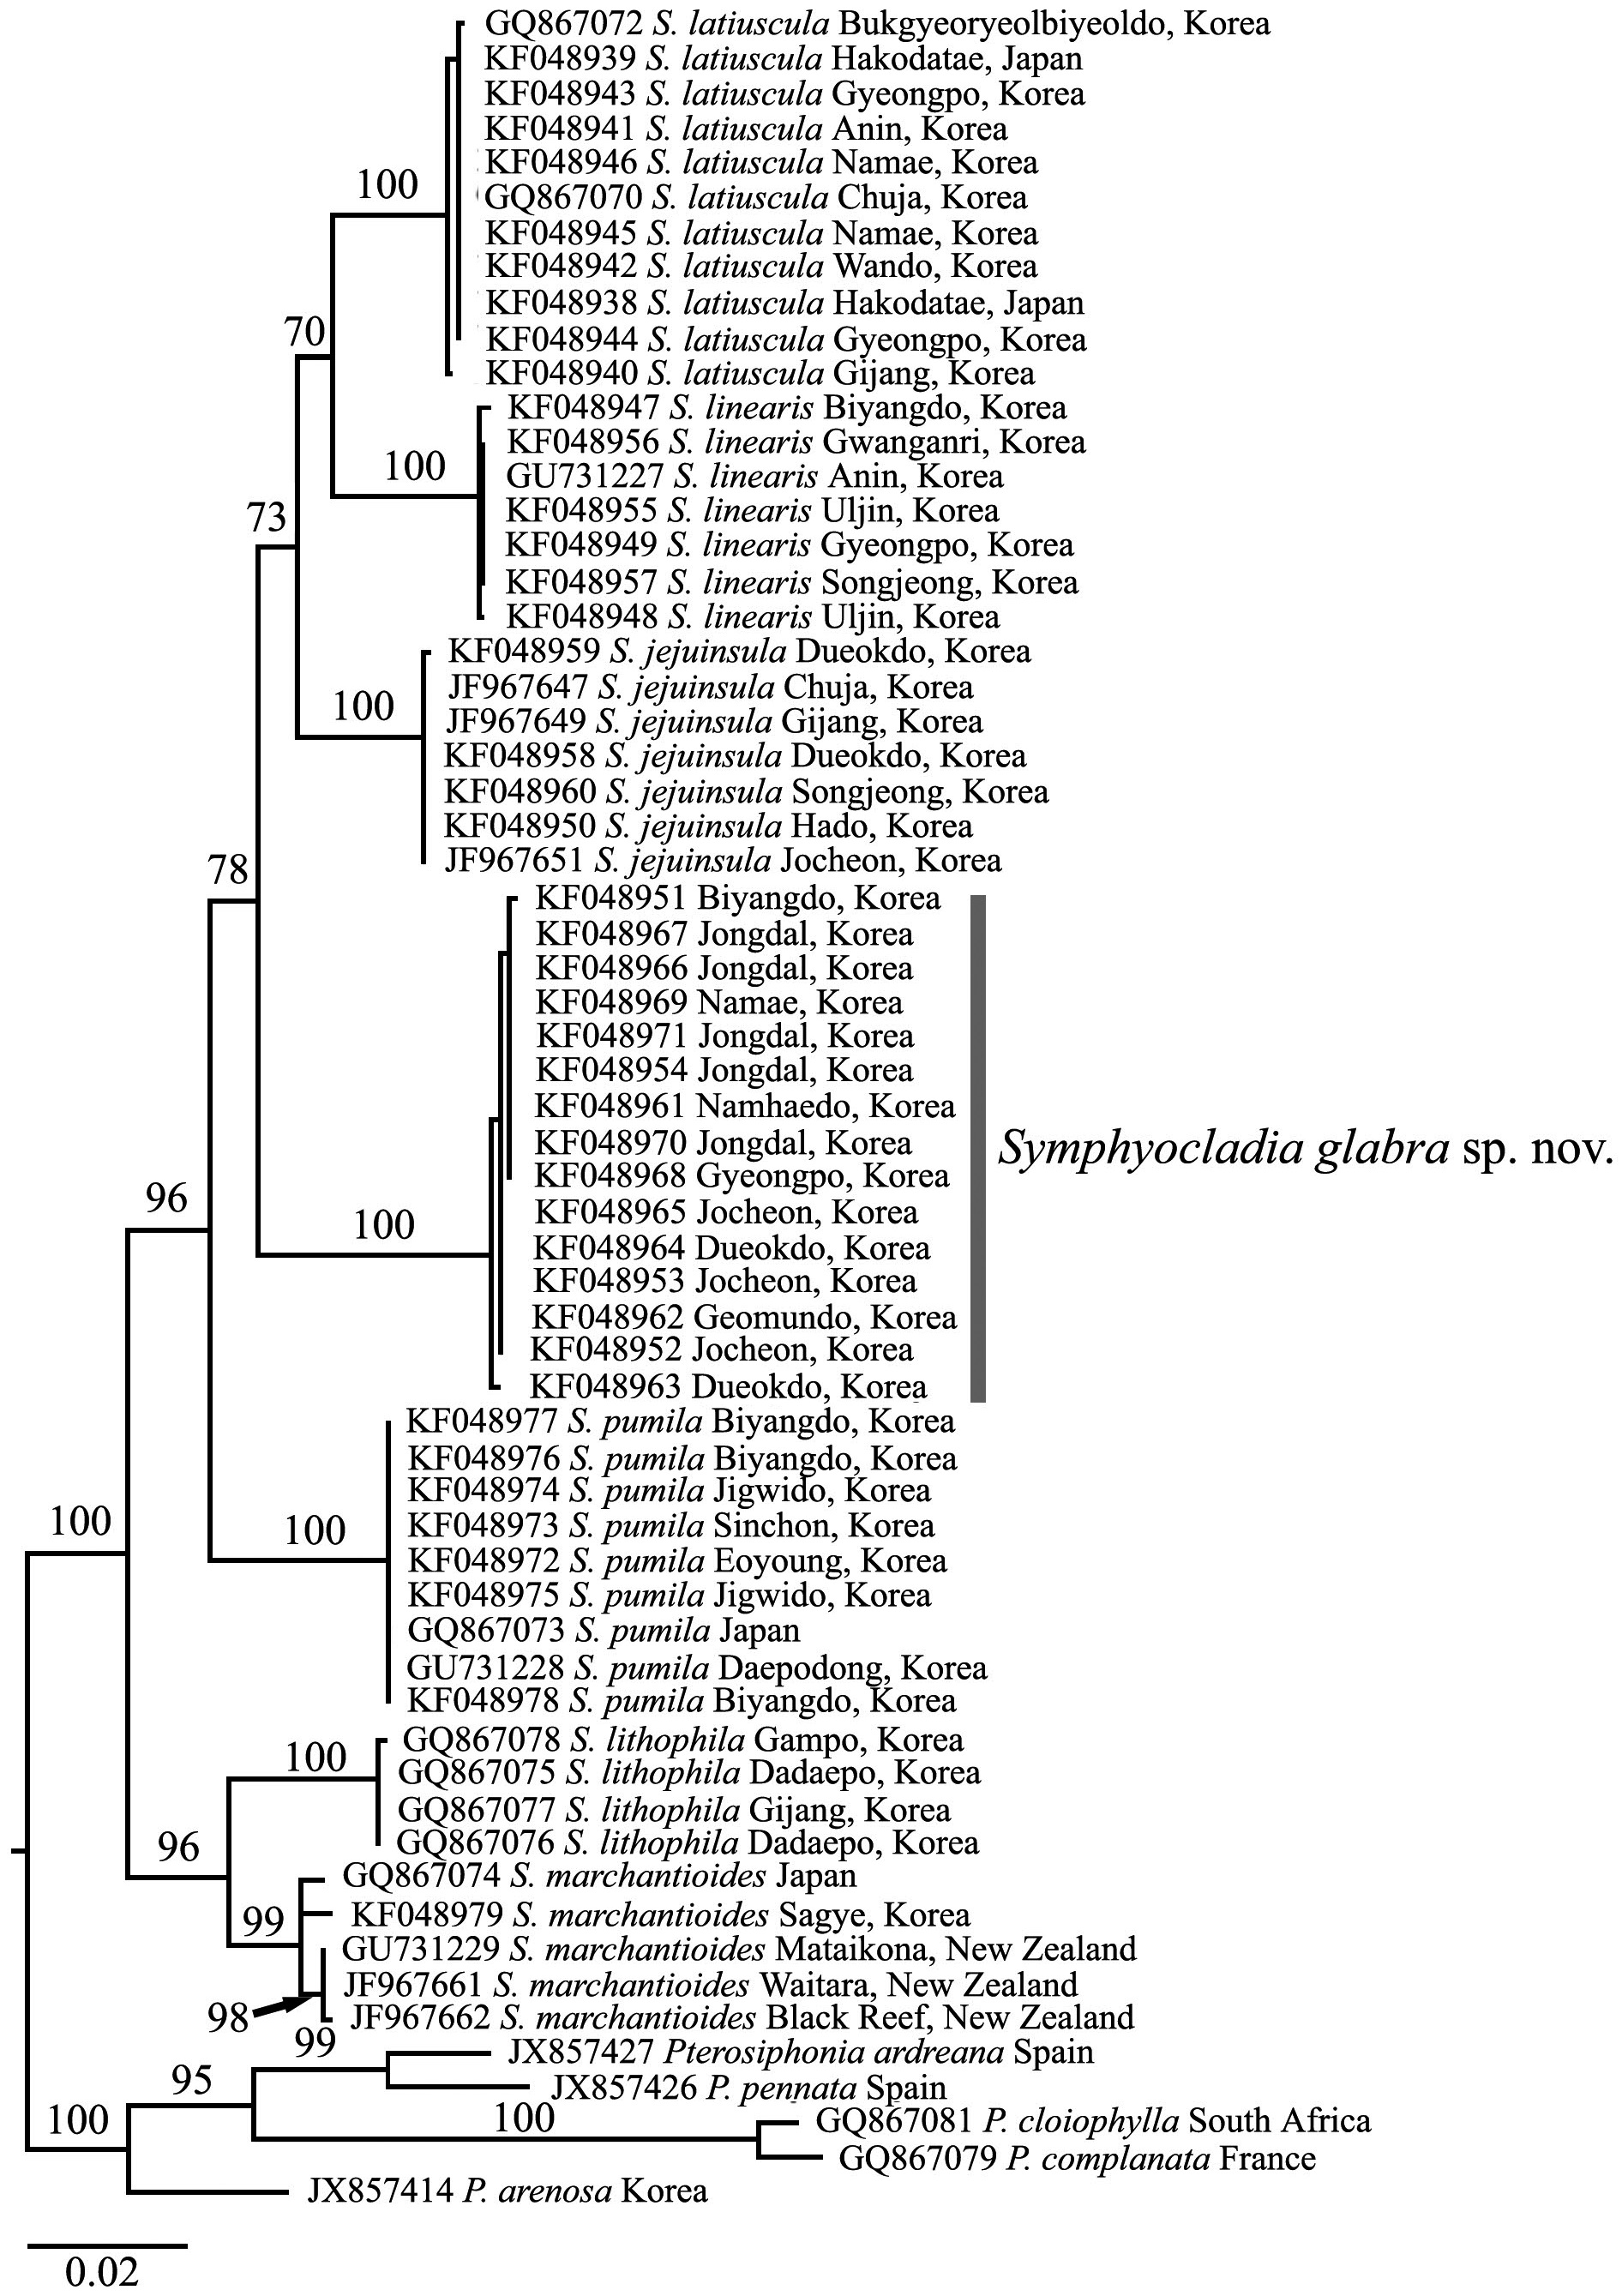 Maximum likelihood phylogenetic tree for the genus Symphyocladia and relatives derived from plastid-encoded rbcL sequence data. The bootstrap values (1,000 replicates) are shown above branches.